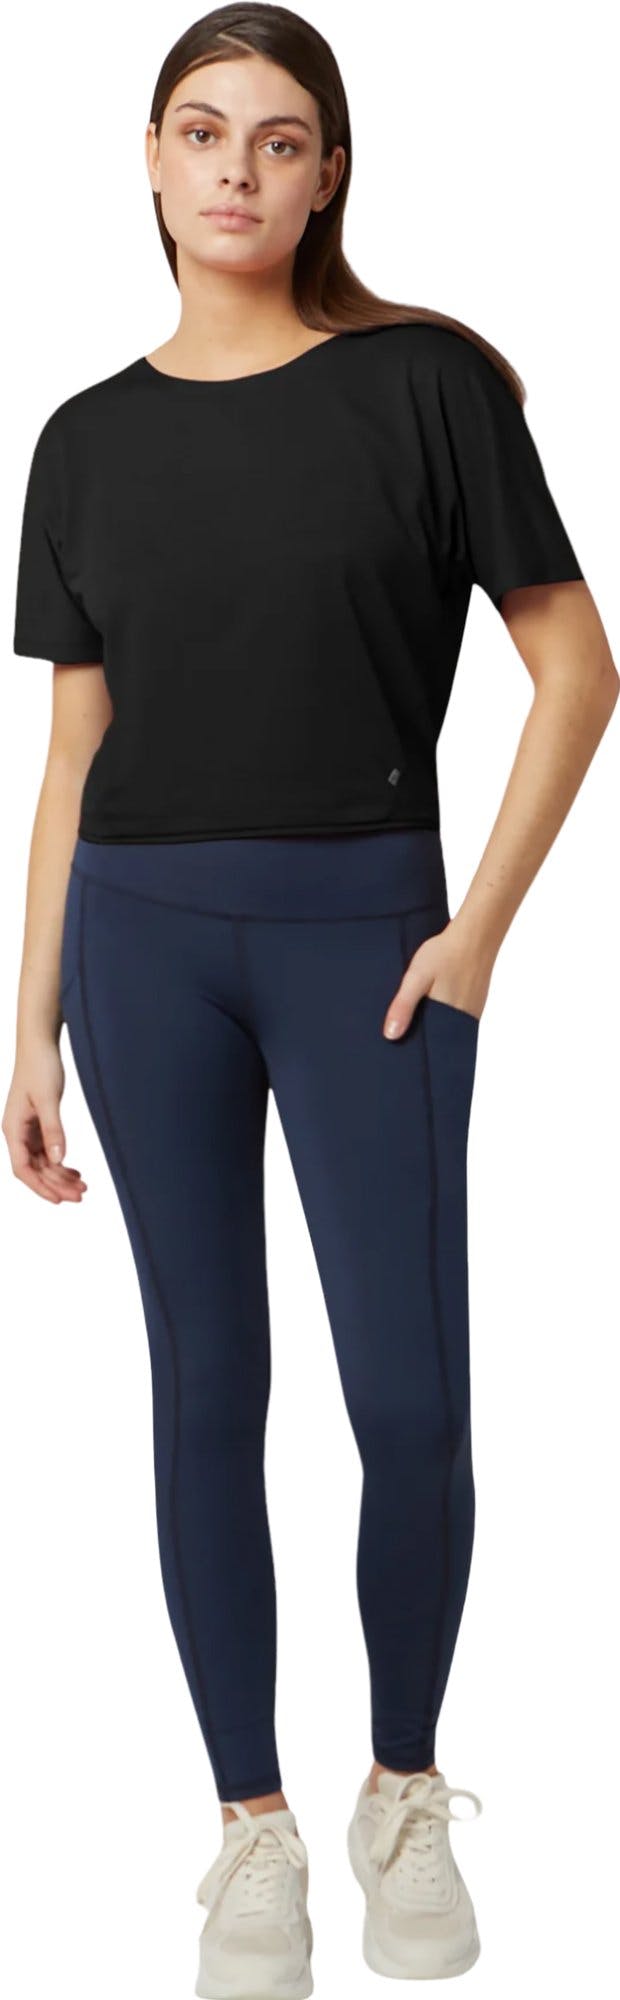 Product image for Kao Top - Women's